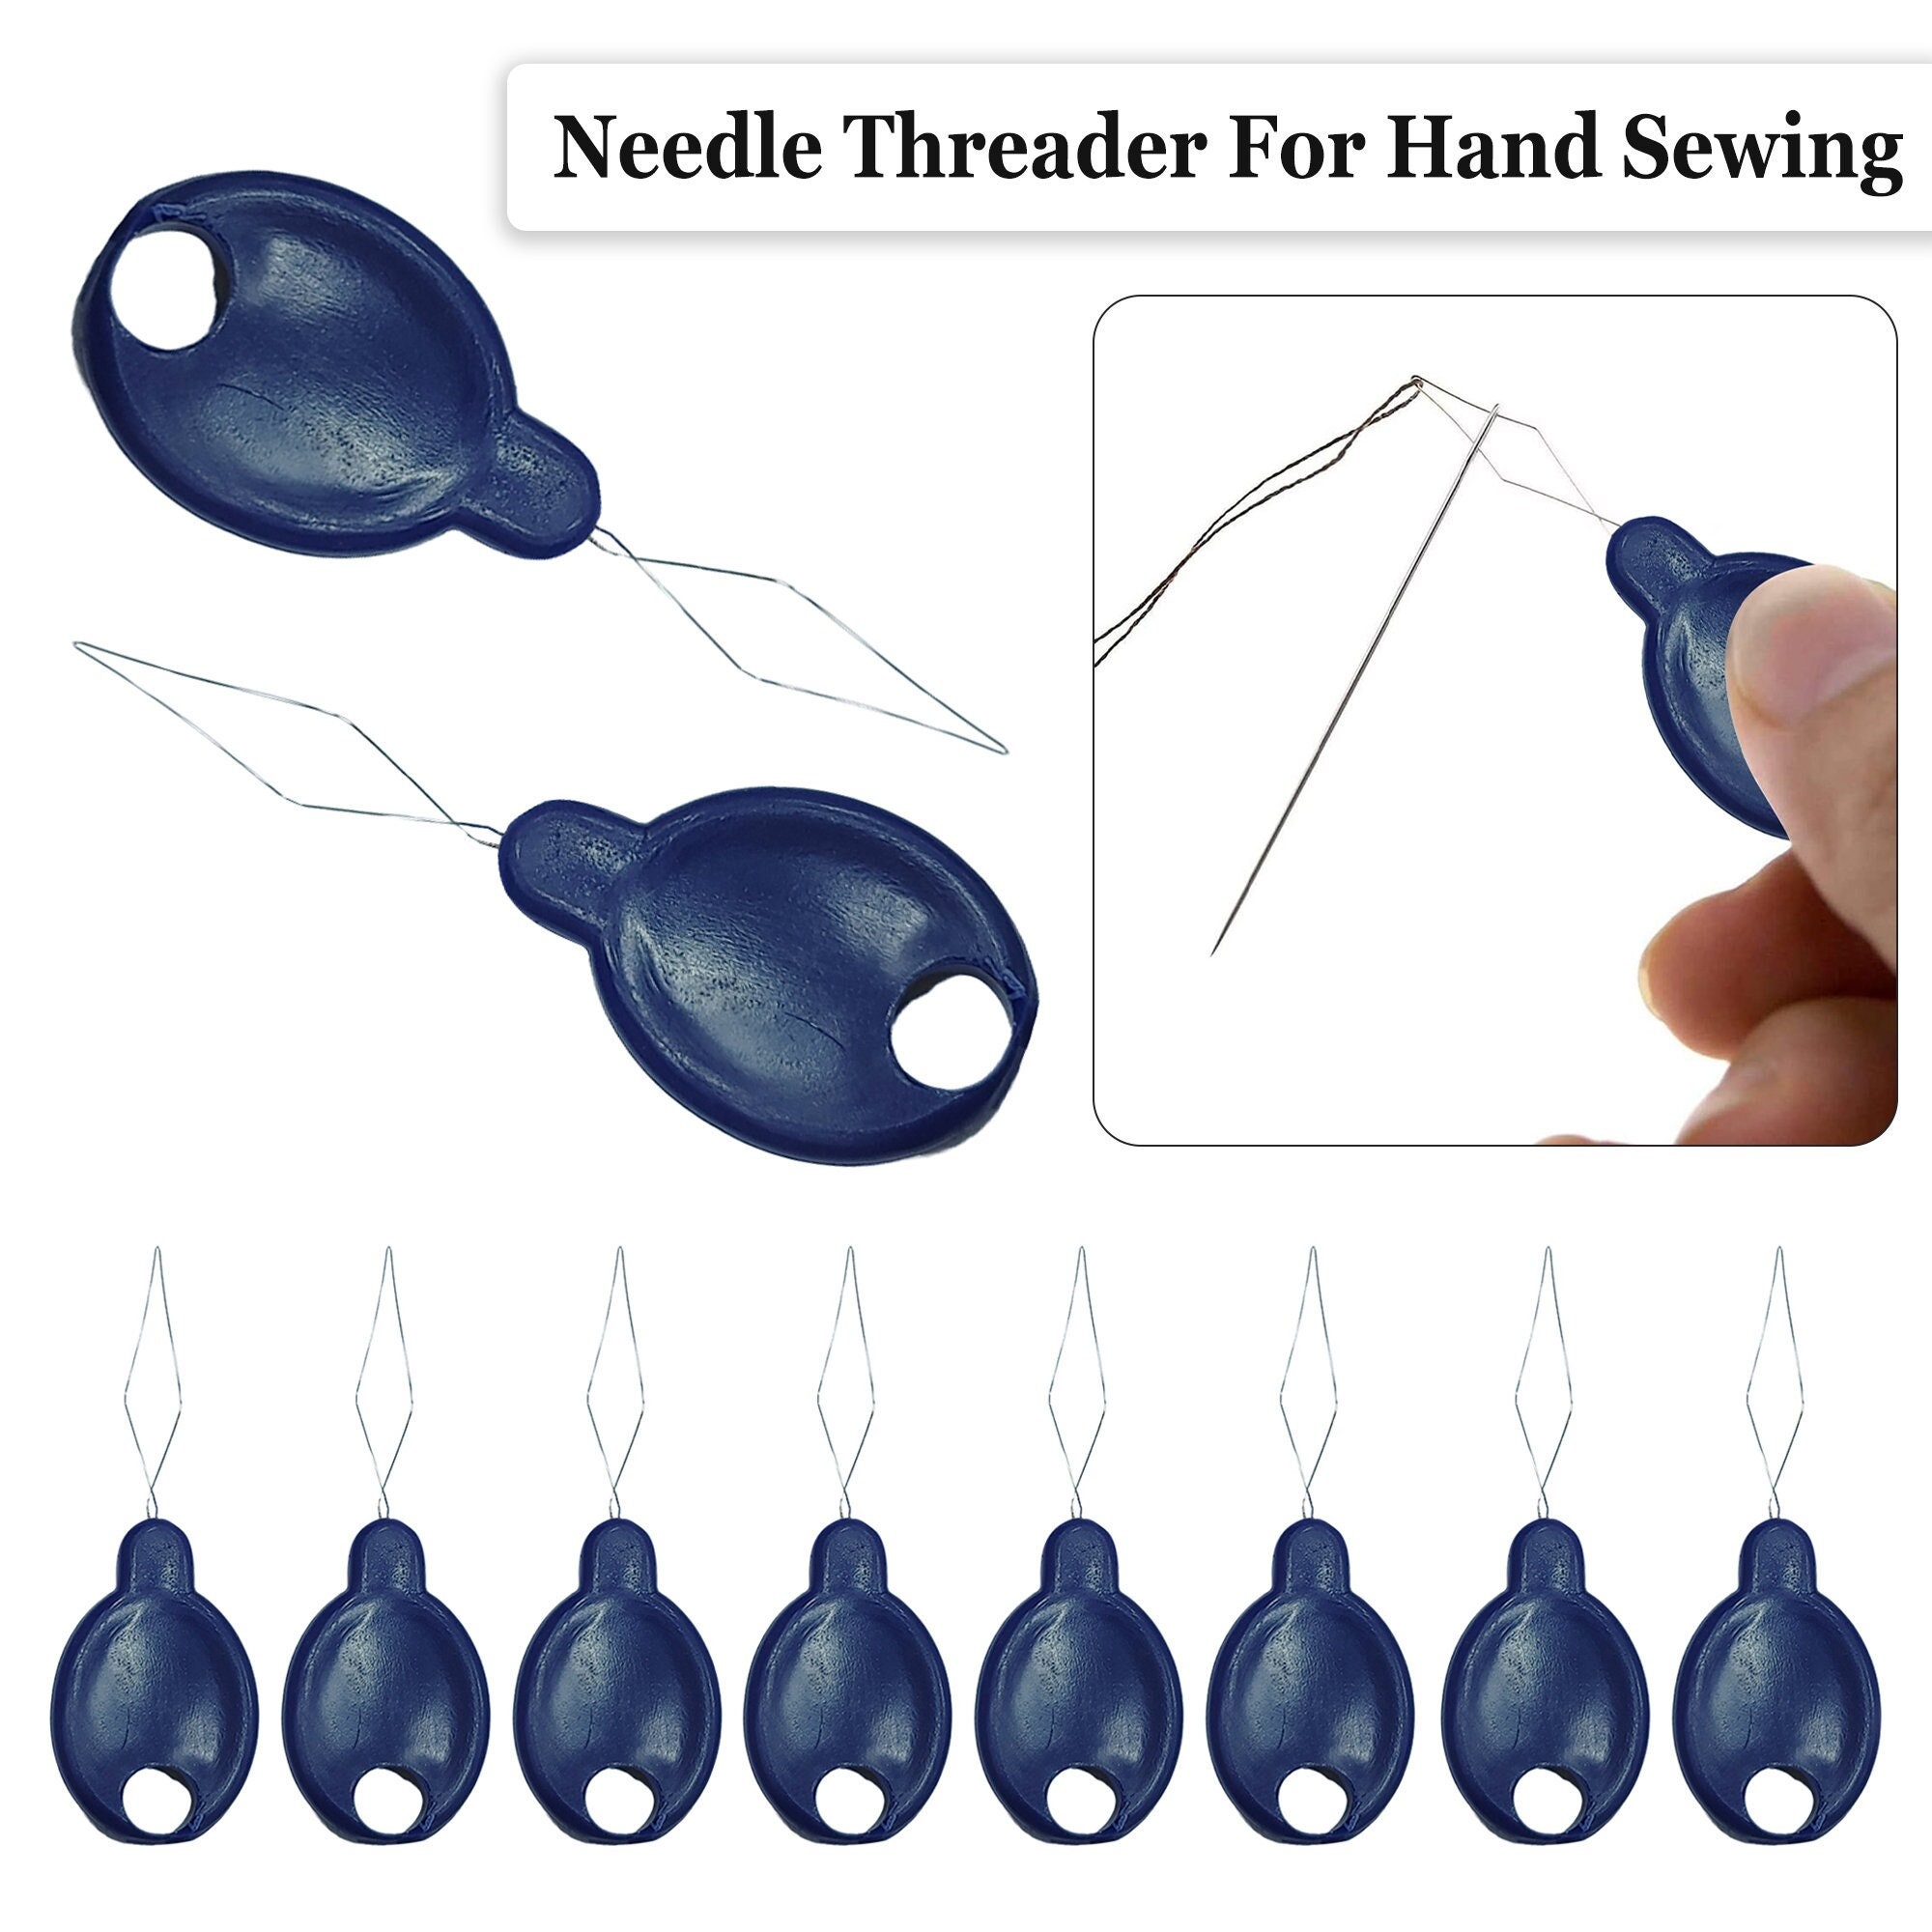 10PCS Needle Threader for Hand Sewing, Automatic Needle Threader